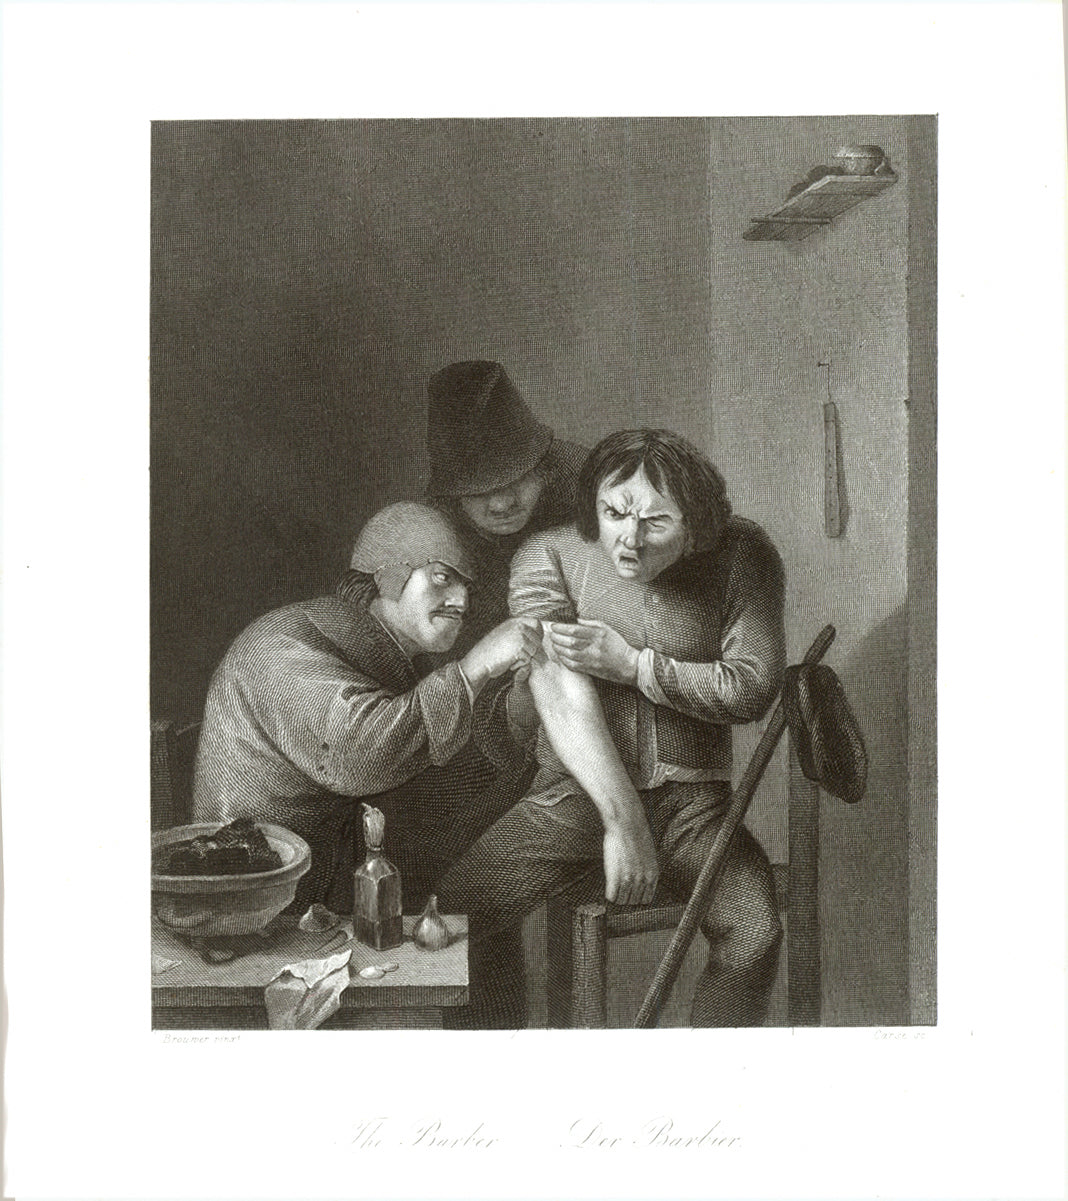 Surgeon. - "Le Barbier - The Barber - Der Barbier" (Surgeon at work)  A surgeon (barber) takes care of a wounded arm.  Steel engraving by A. Carse after the painting by Adriaen Brouwer  Dresden, ca. 1850